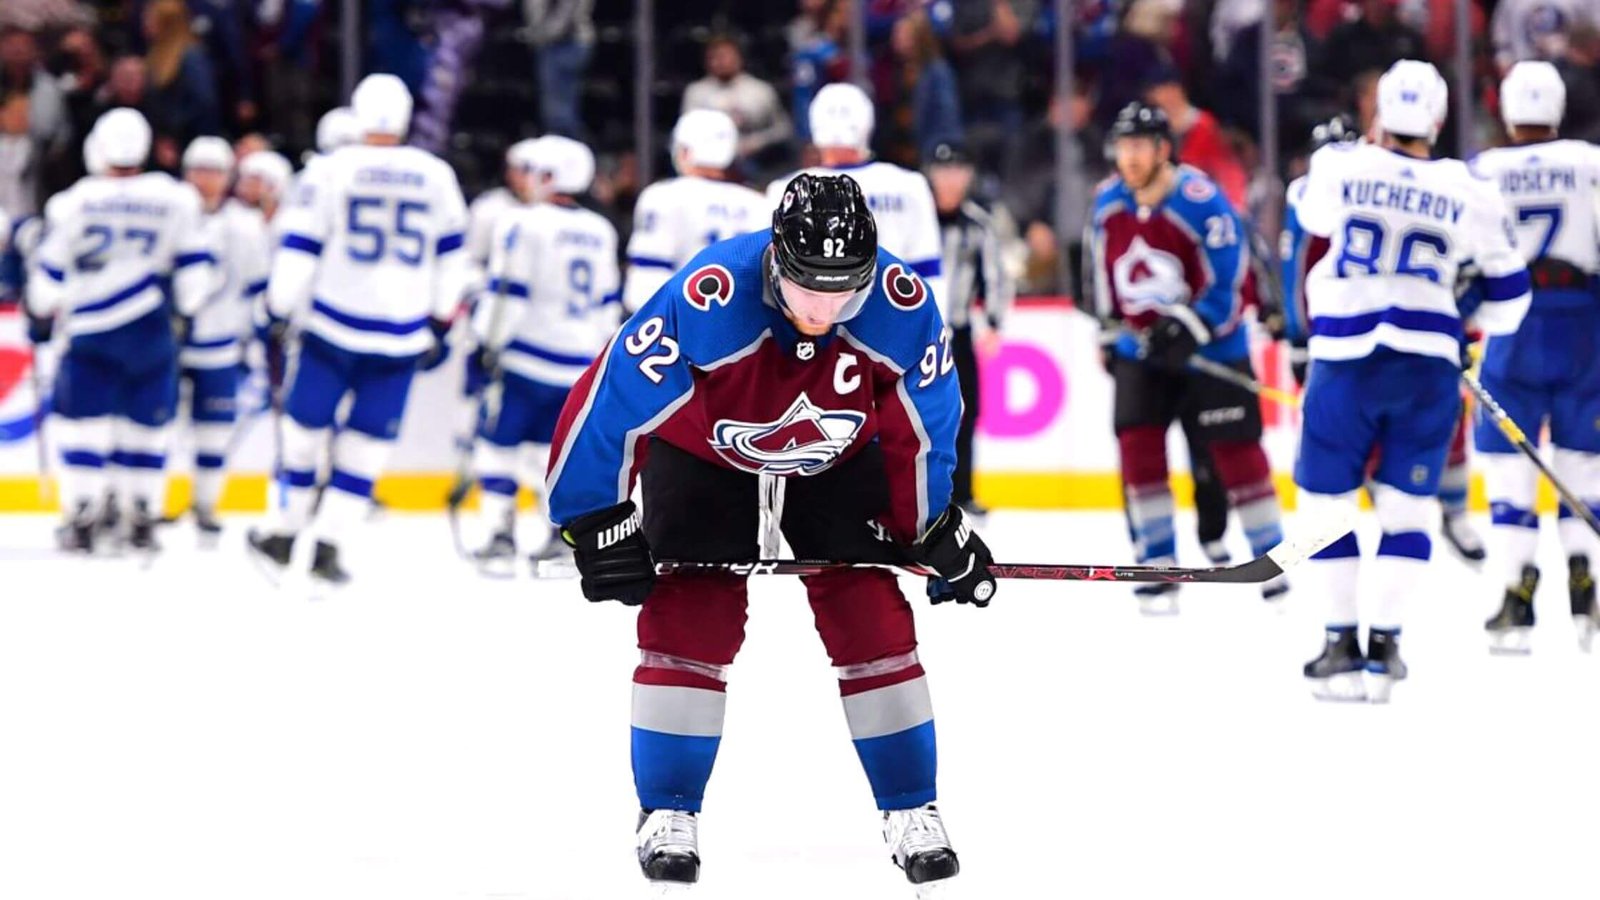 Best Moments From Game 6 Between The Colorado Avalanche And The Tampa Bay Lightning